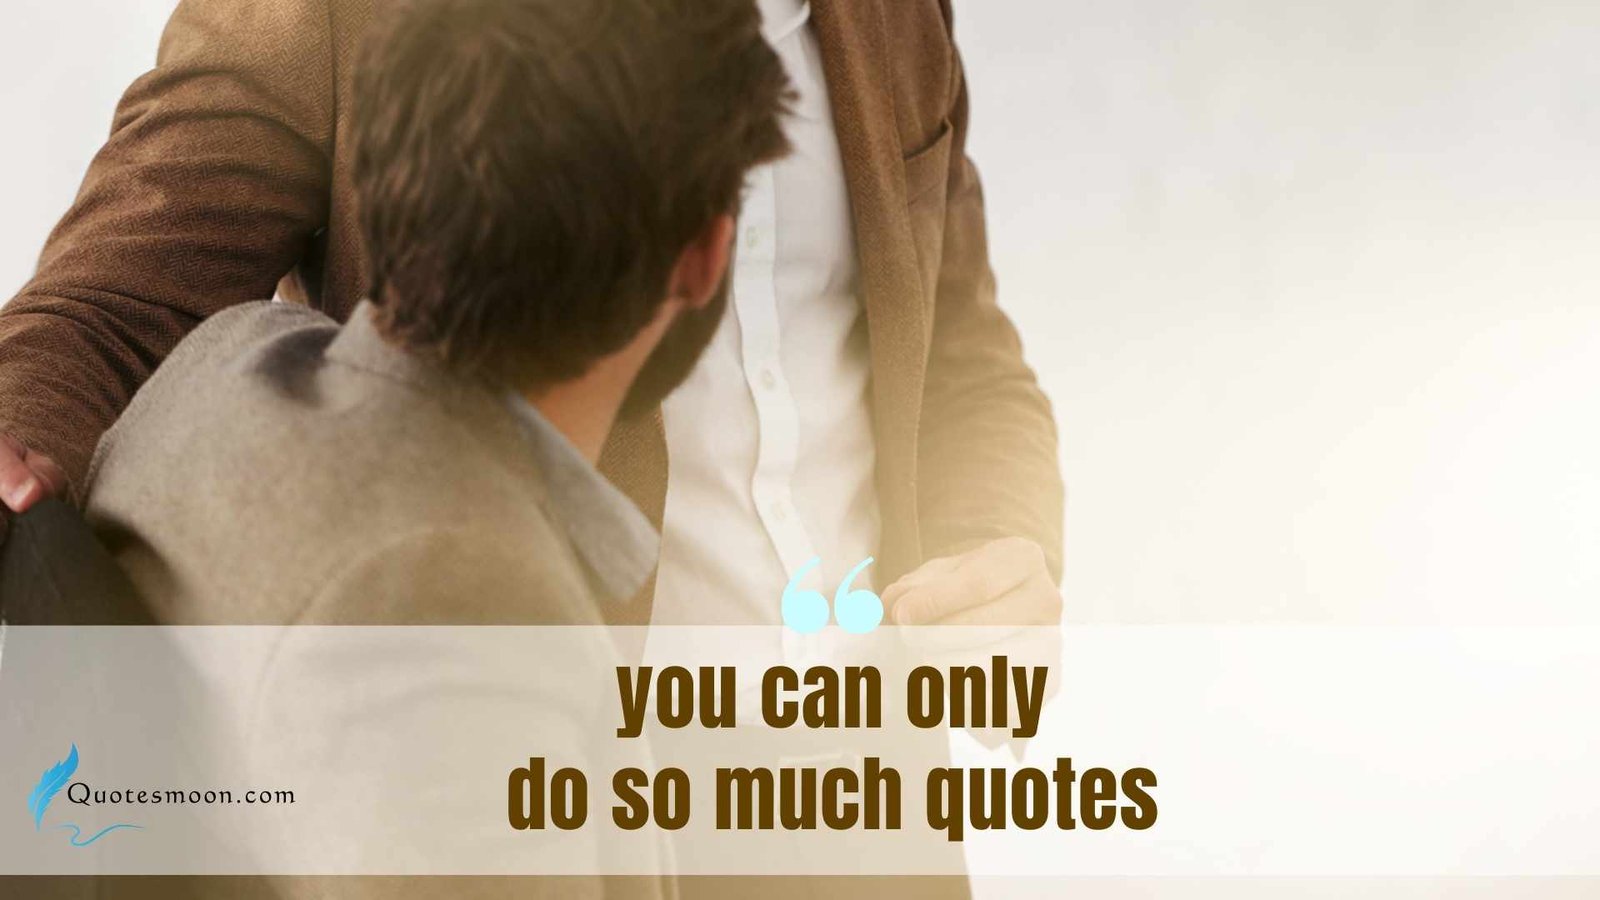 you can only do so much quotes images